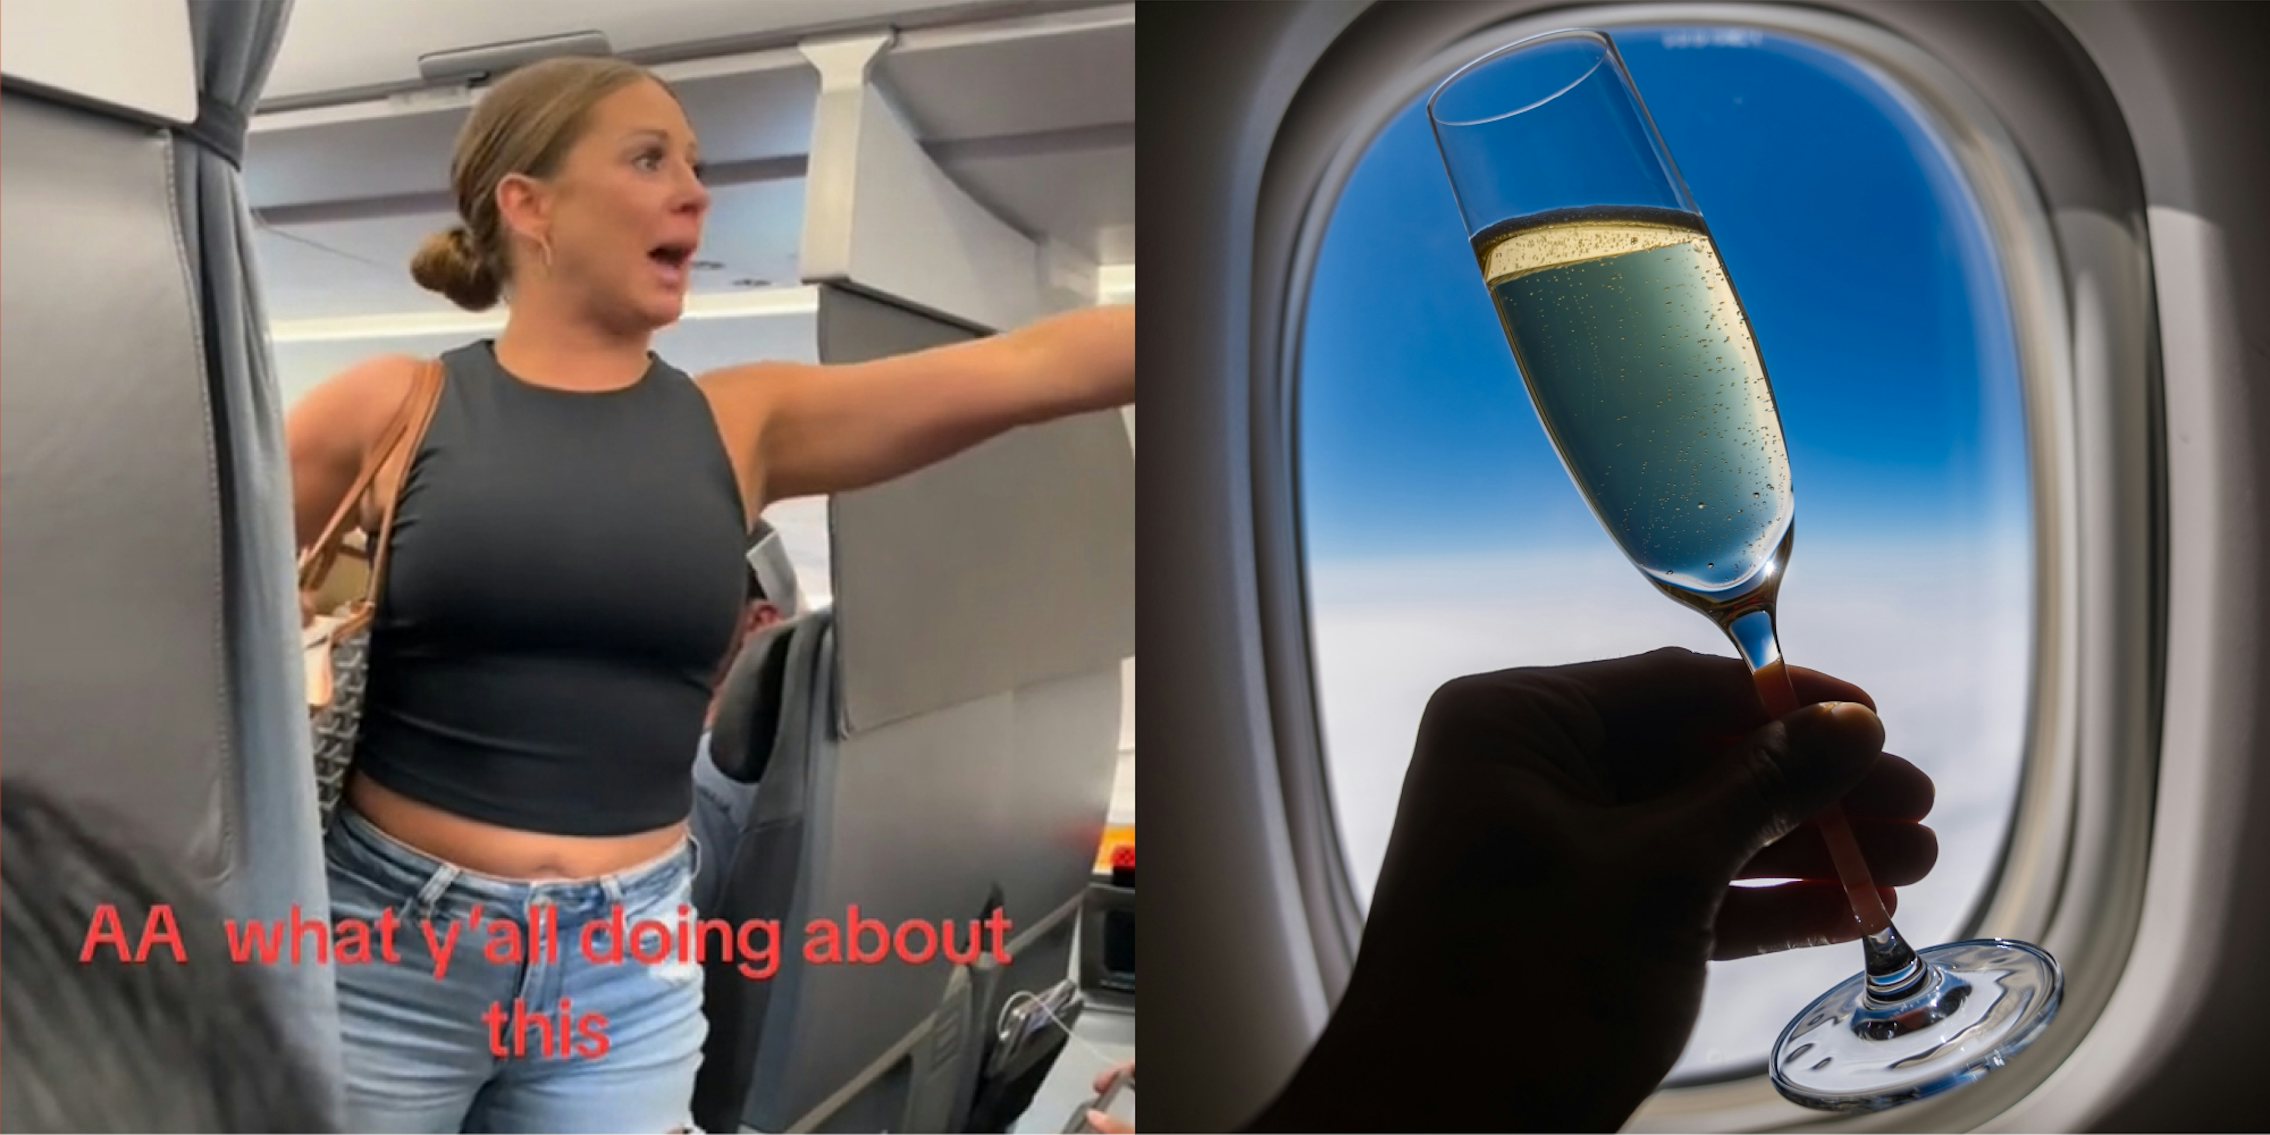 woman speaking in plane with caption 'AA what y'all doing about this' (l) airplane passenger holding glass of champagne up to plane window (r)